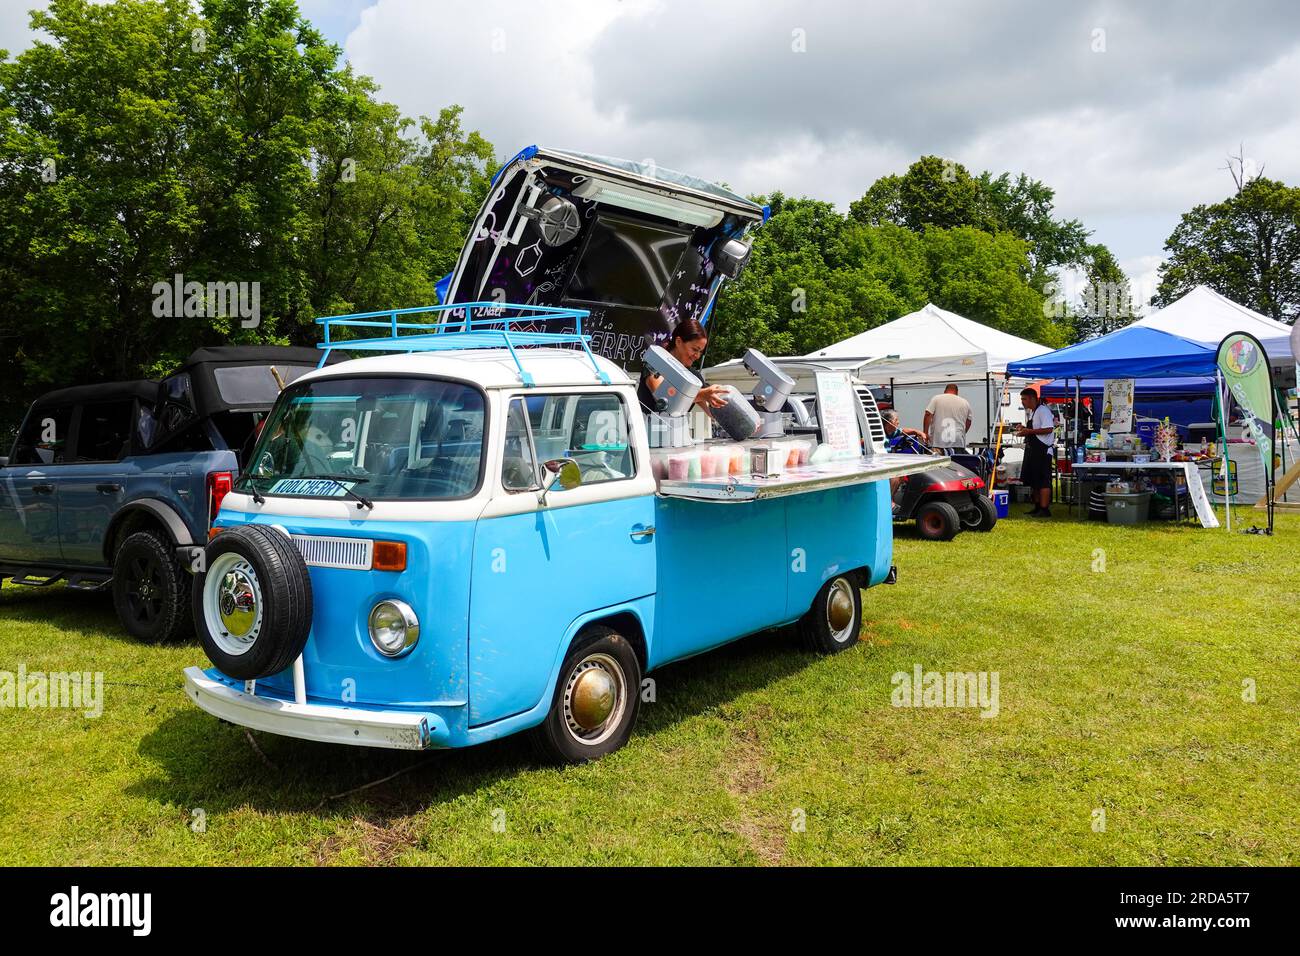 blue vw camper converted to a mobile ice cream vending food truck Stock Photo